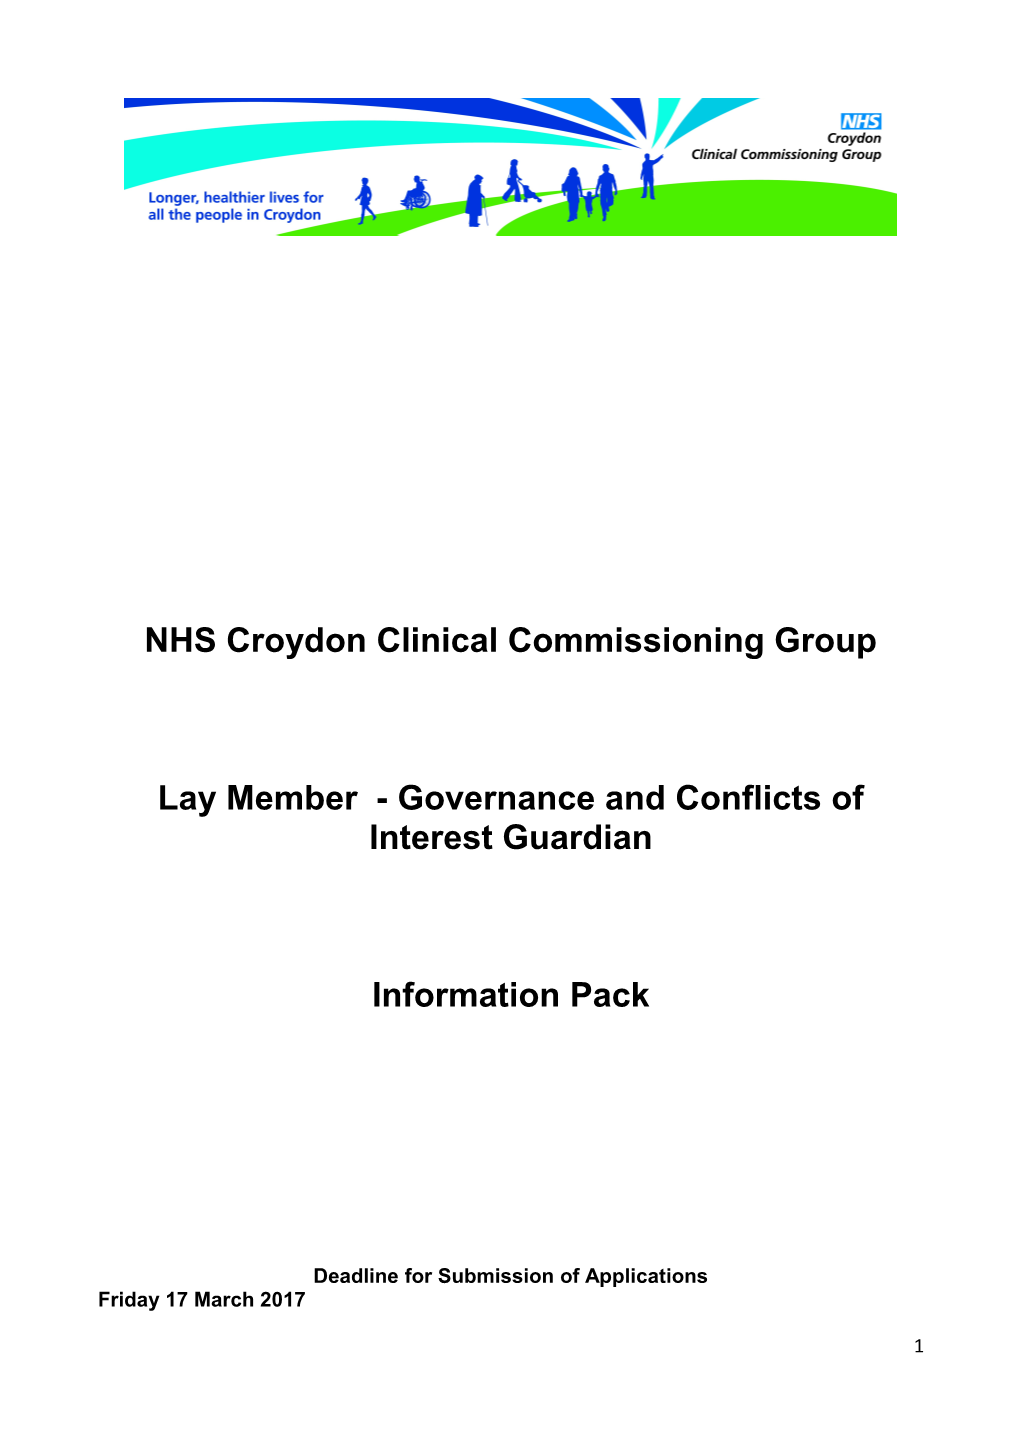 NHS Croydon Clinical Commissioning Group